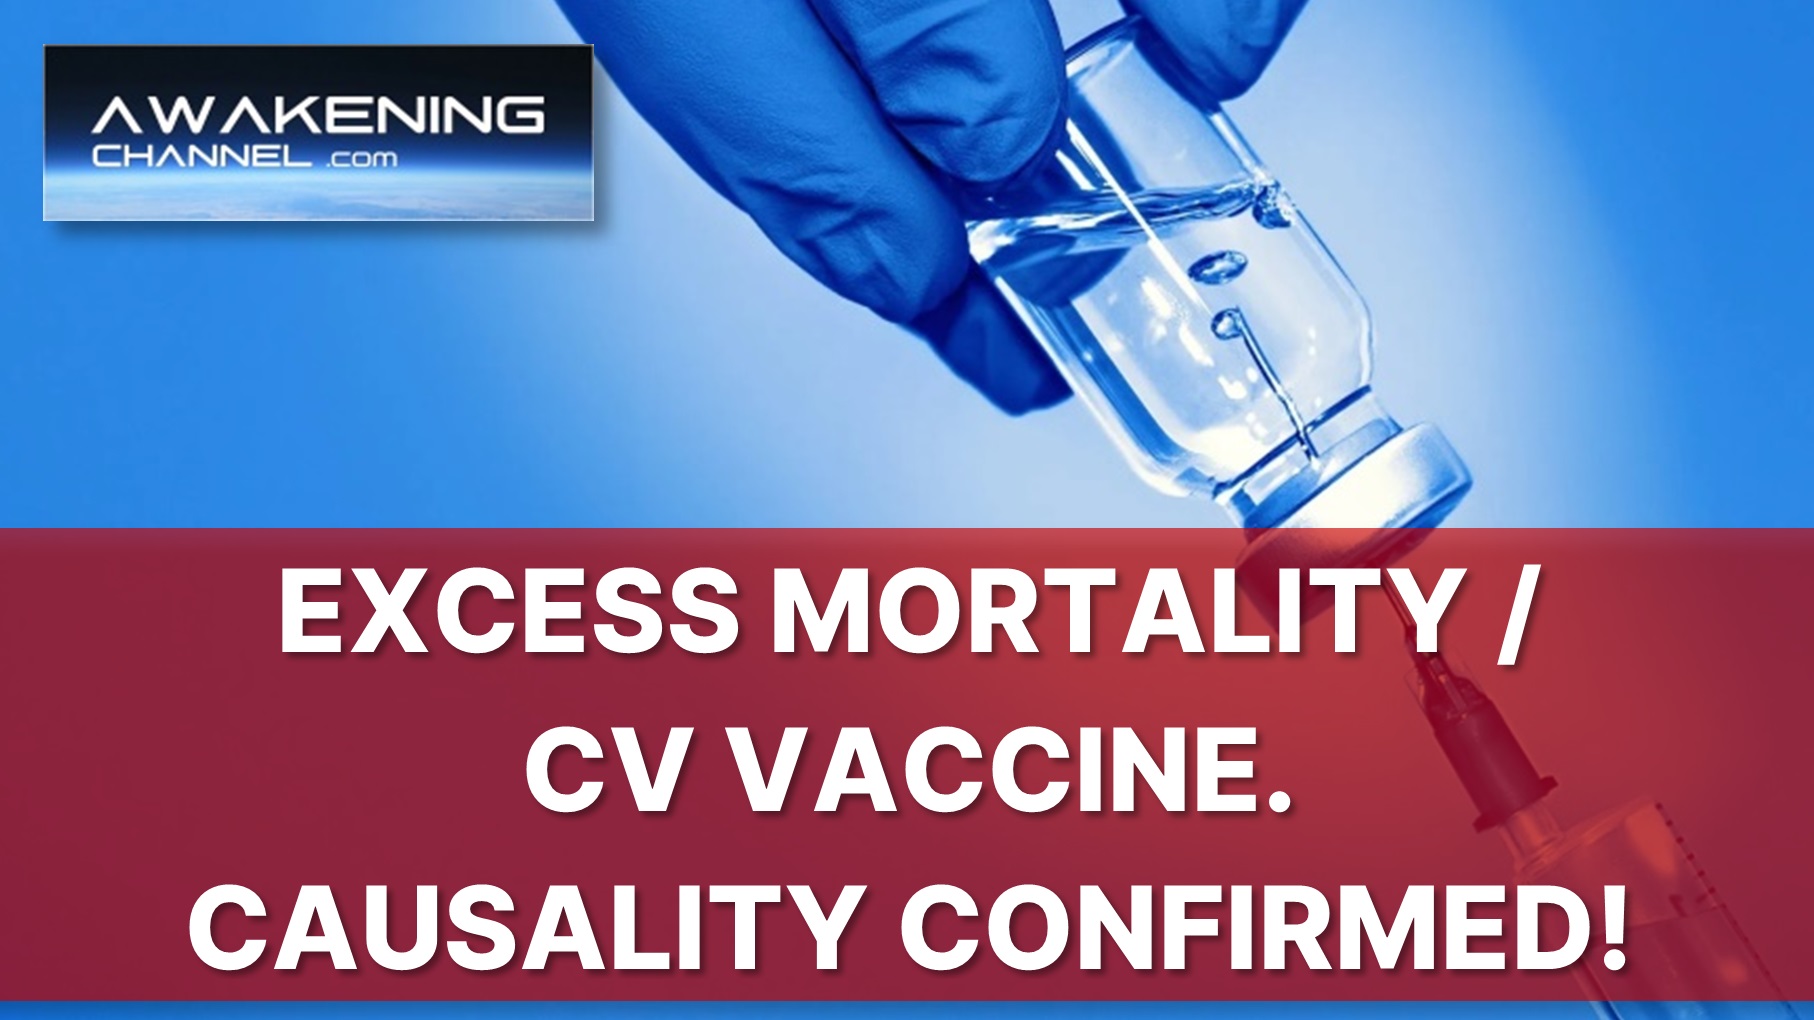 Causality Confirmed!  Dramatic Surges in All-Cause Mortality Linked to CV Vaccine Rollouts